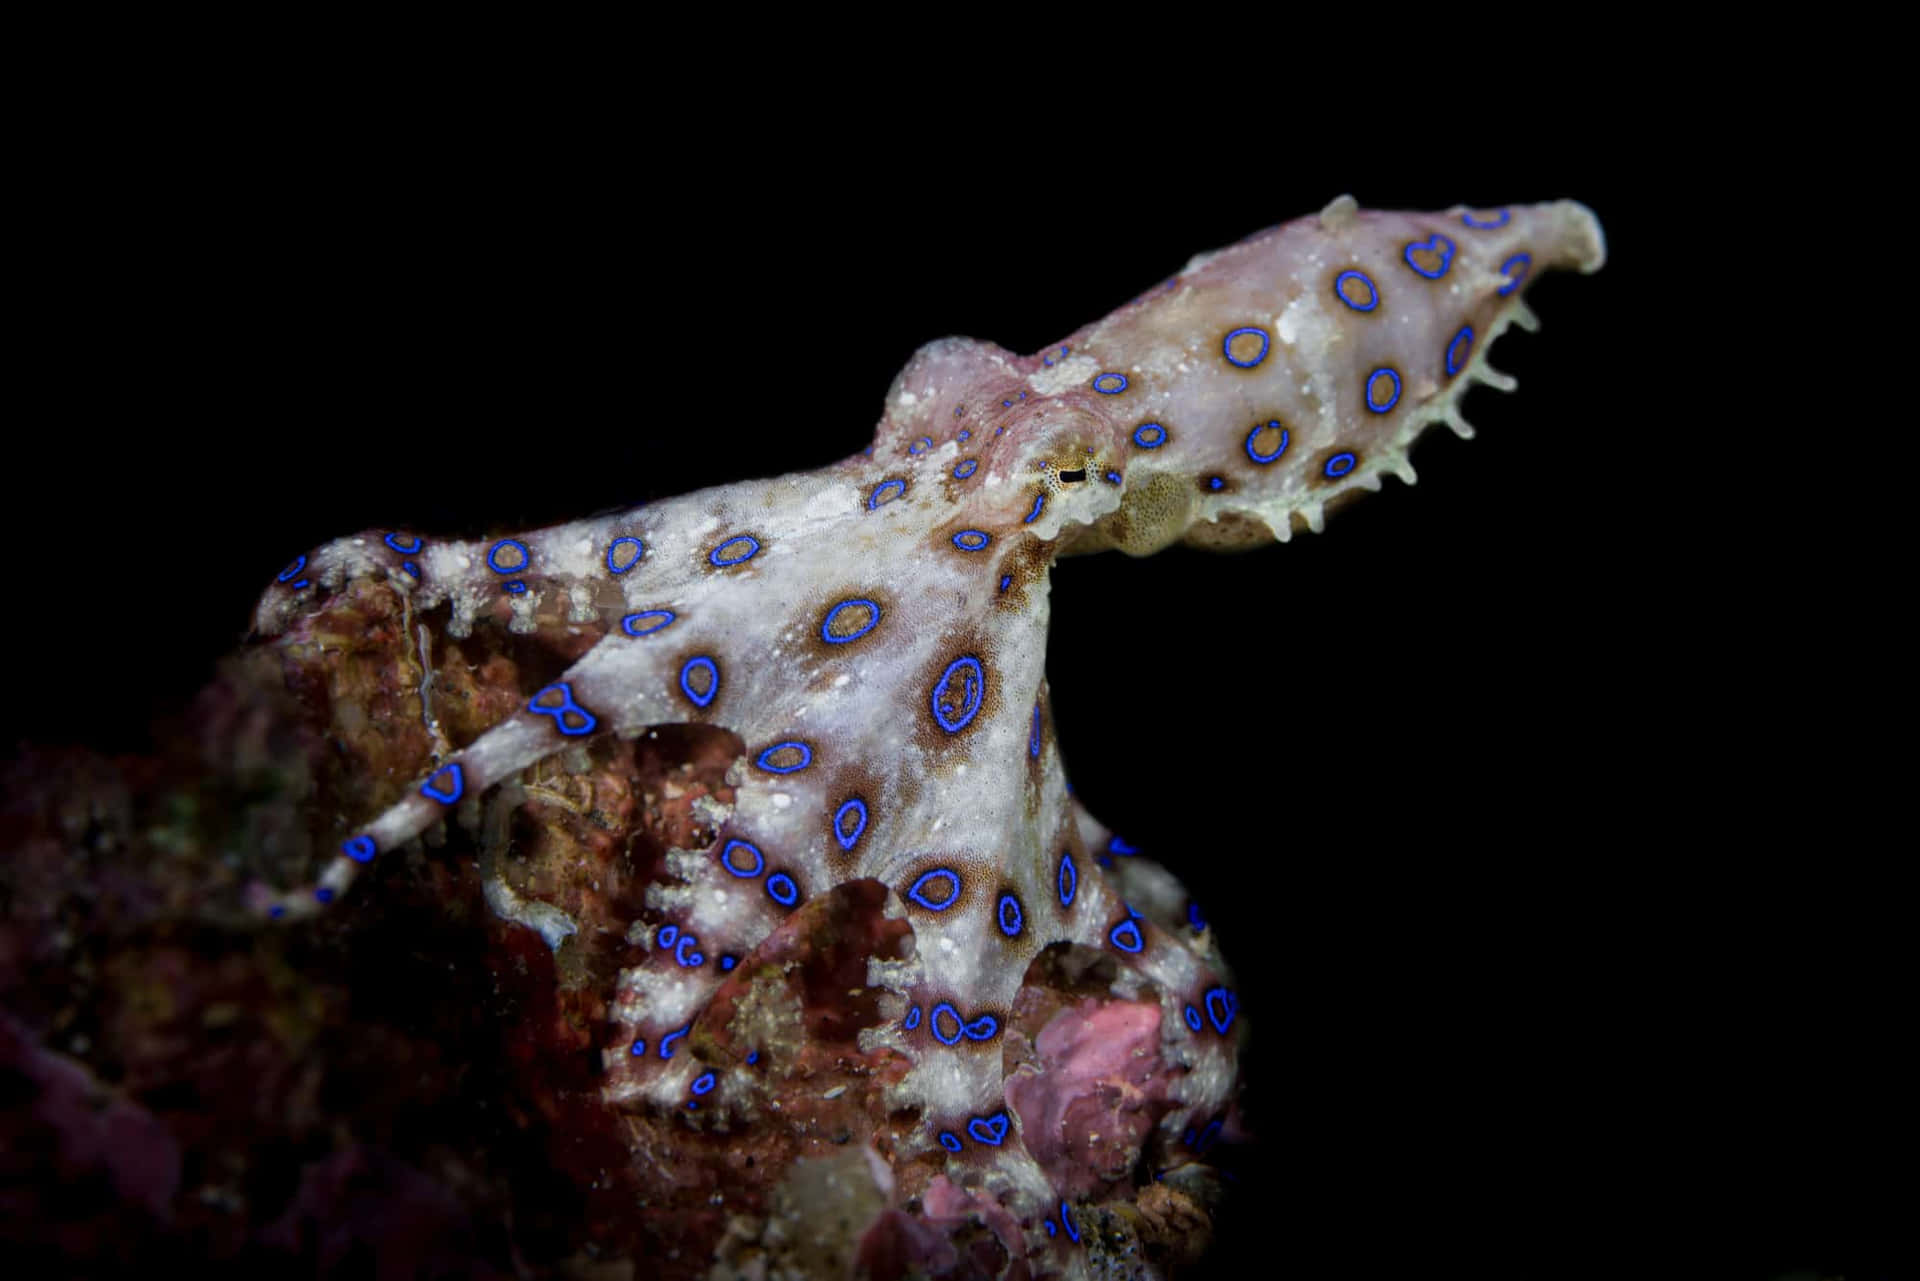 Blue Ringed Octopus Camouflage Wallpaper